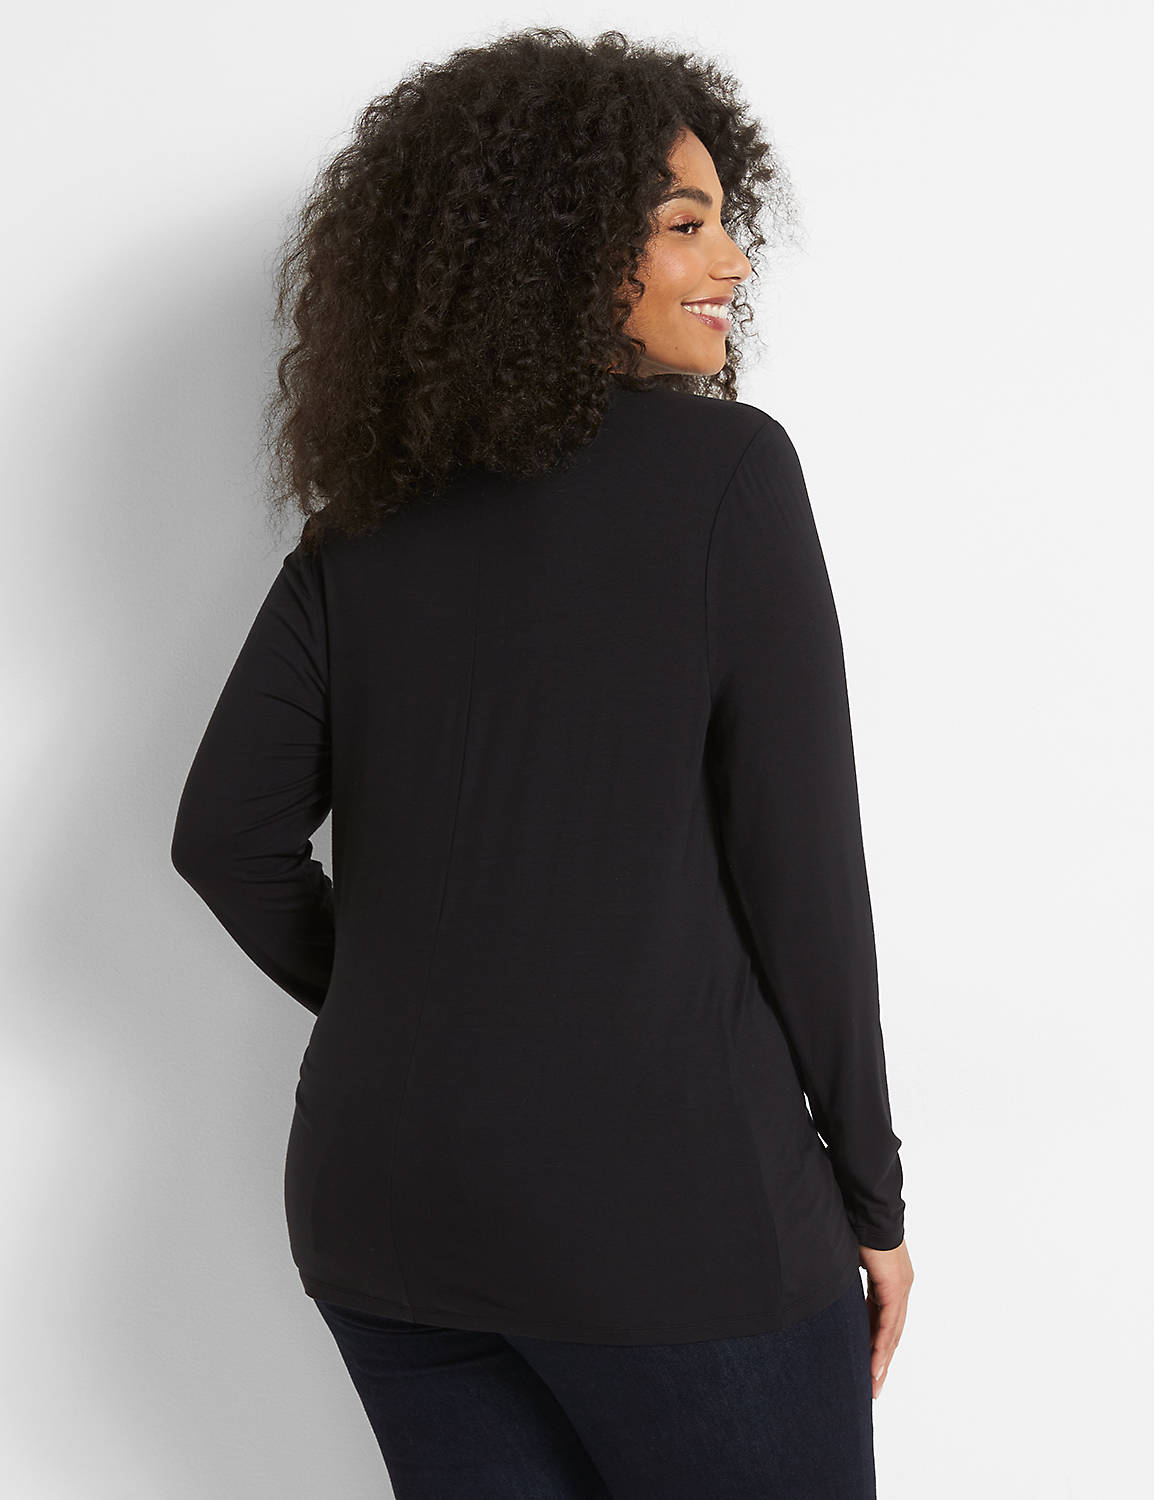 Long Sleeve Envelope Neck Tee With Lace Detail 1123838:Ascena Black:34/36 Product Image 2